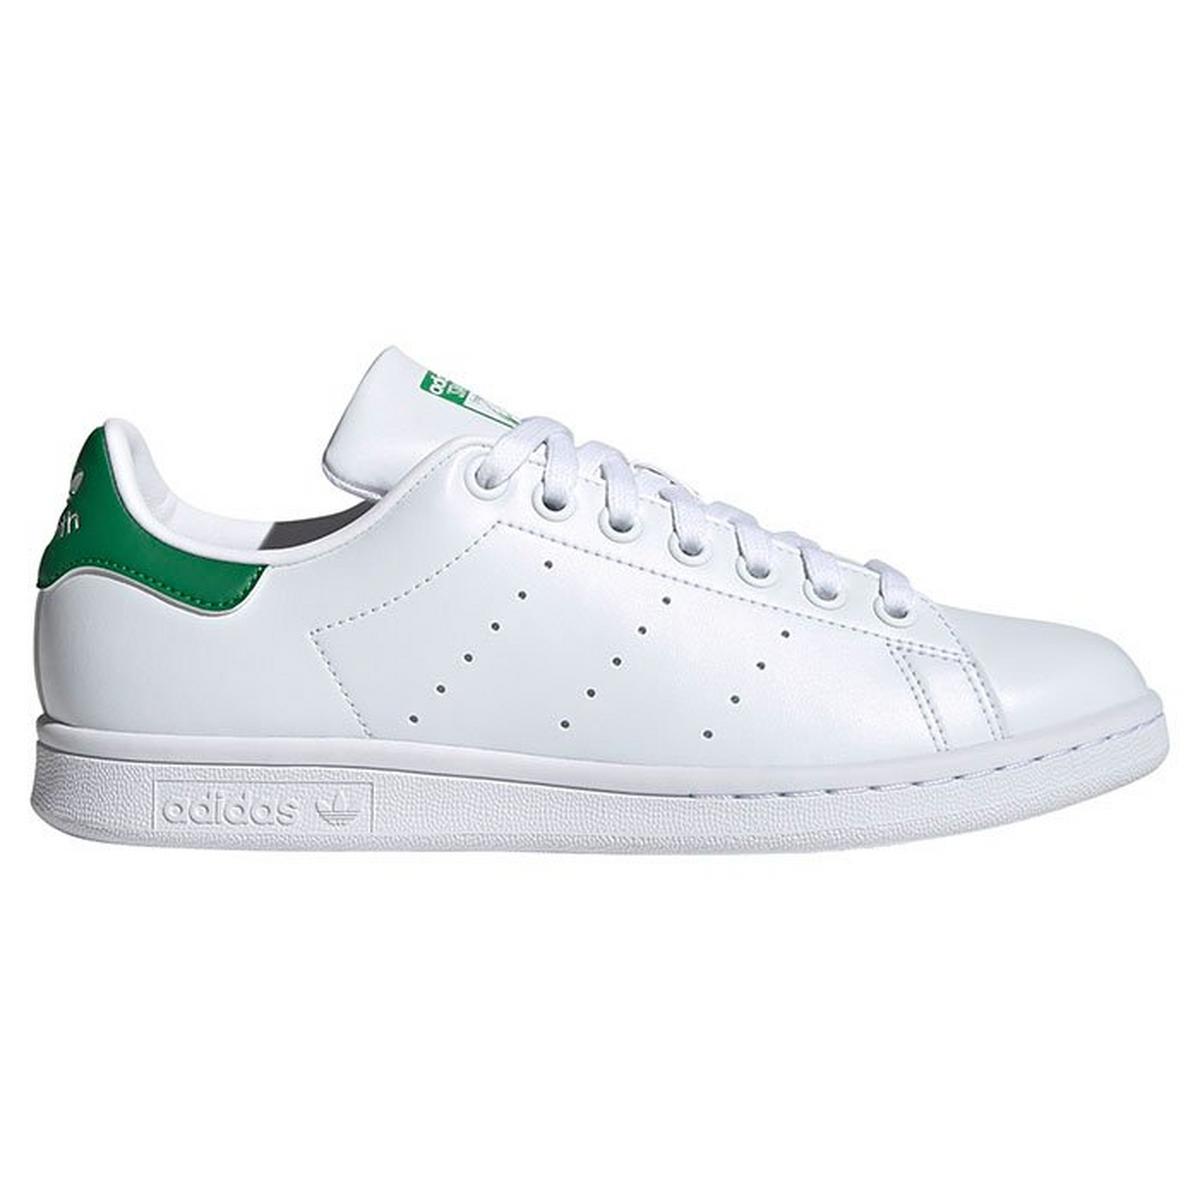 Chaussures Stan Smith pour femmes